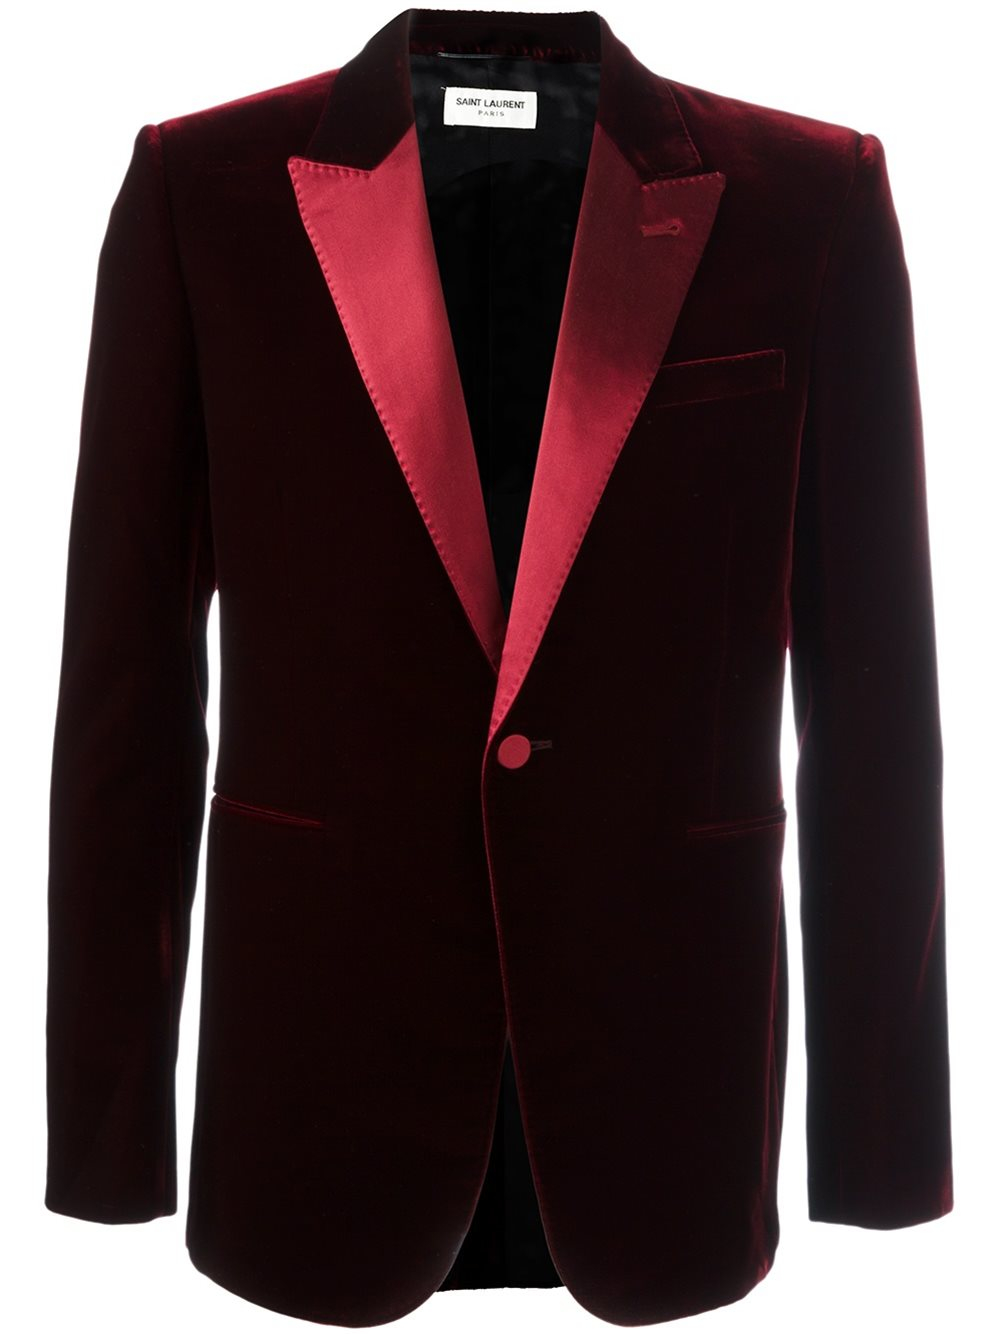 Lyst - Saint Laurent 'iconic Le Smoking' 70's Velour Jacket in Red for Men